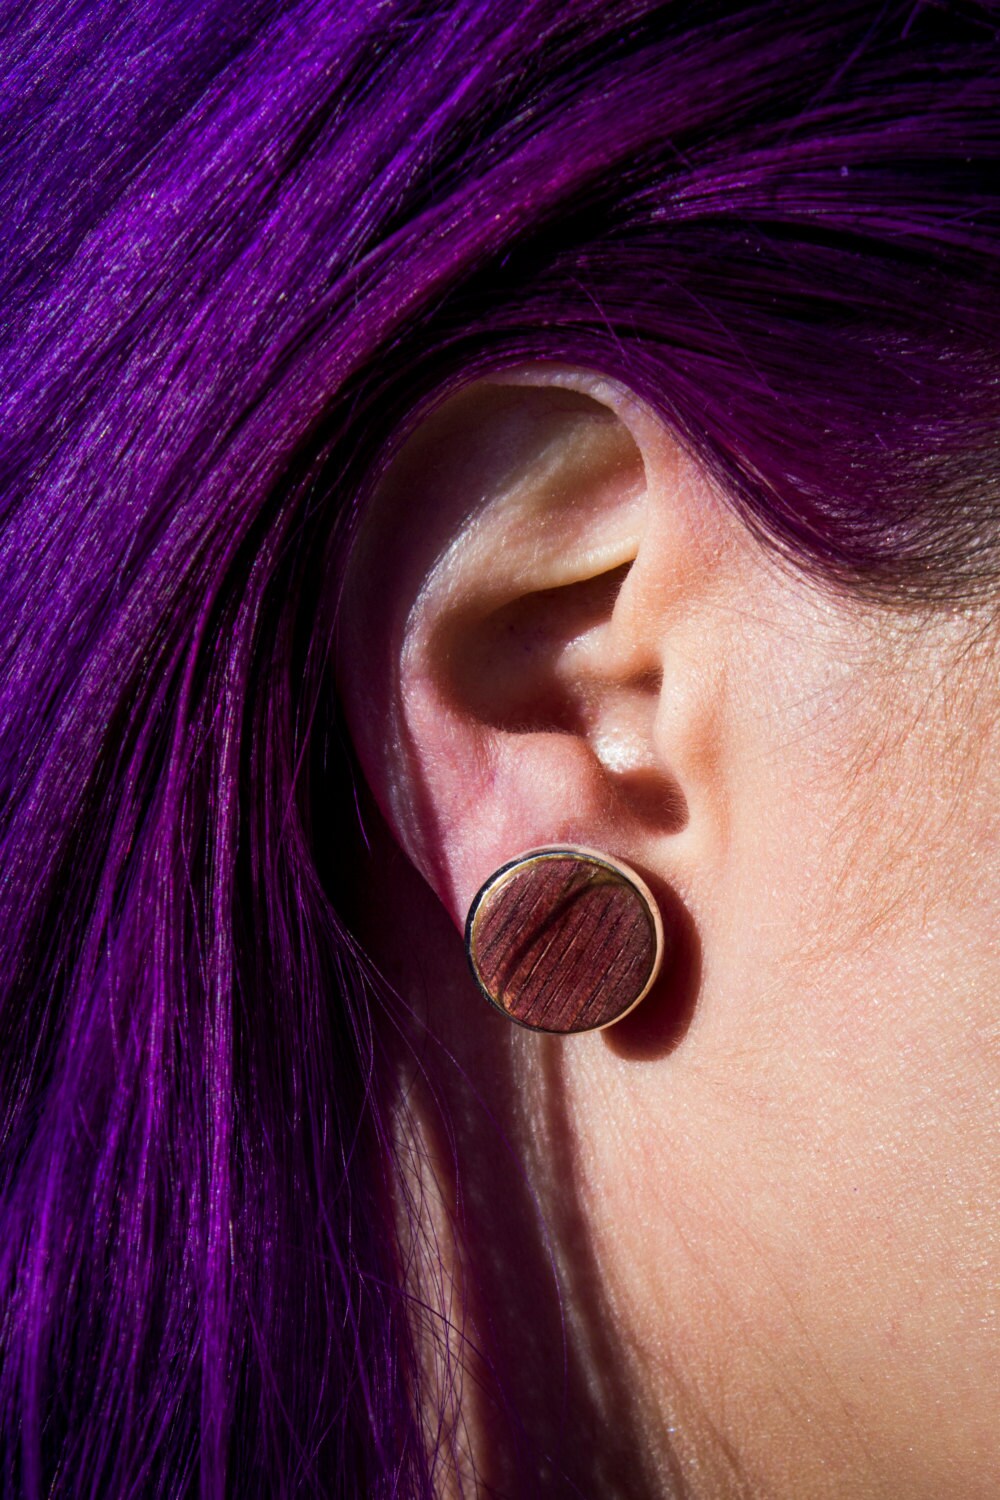 Wine Stave Stud Earrings - Studs - Made from reclaimed California wine barrels. 100% Recycled!